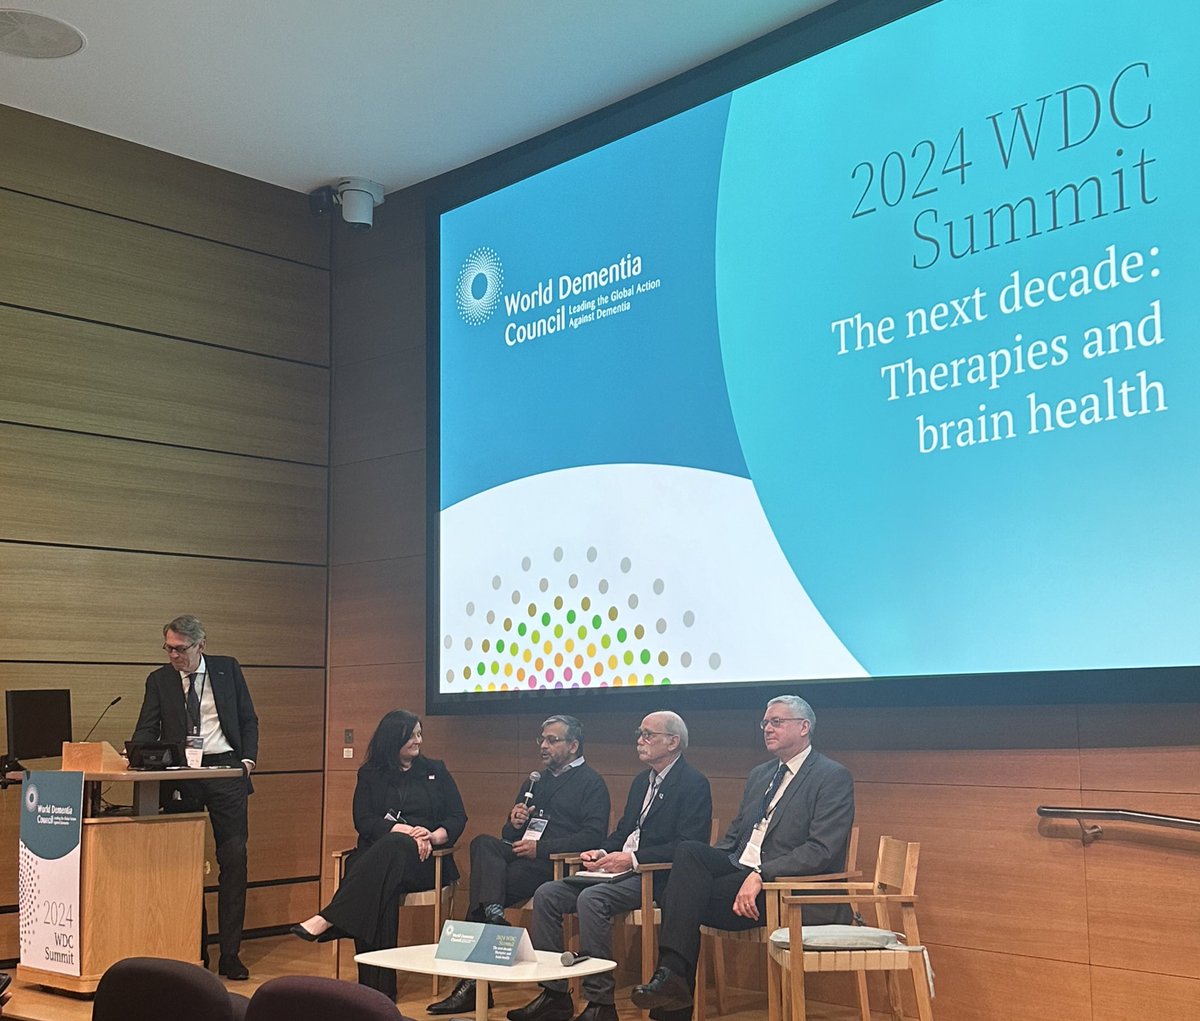 I’m at the @WorldDementia today. Great opening panel with @niranjanbose @AlzResearchUK Scientist @FionaDucotterd & @ProfJTOBrien about how we deliver treatments over the next 10 years.